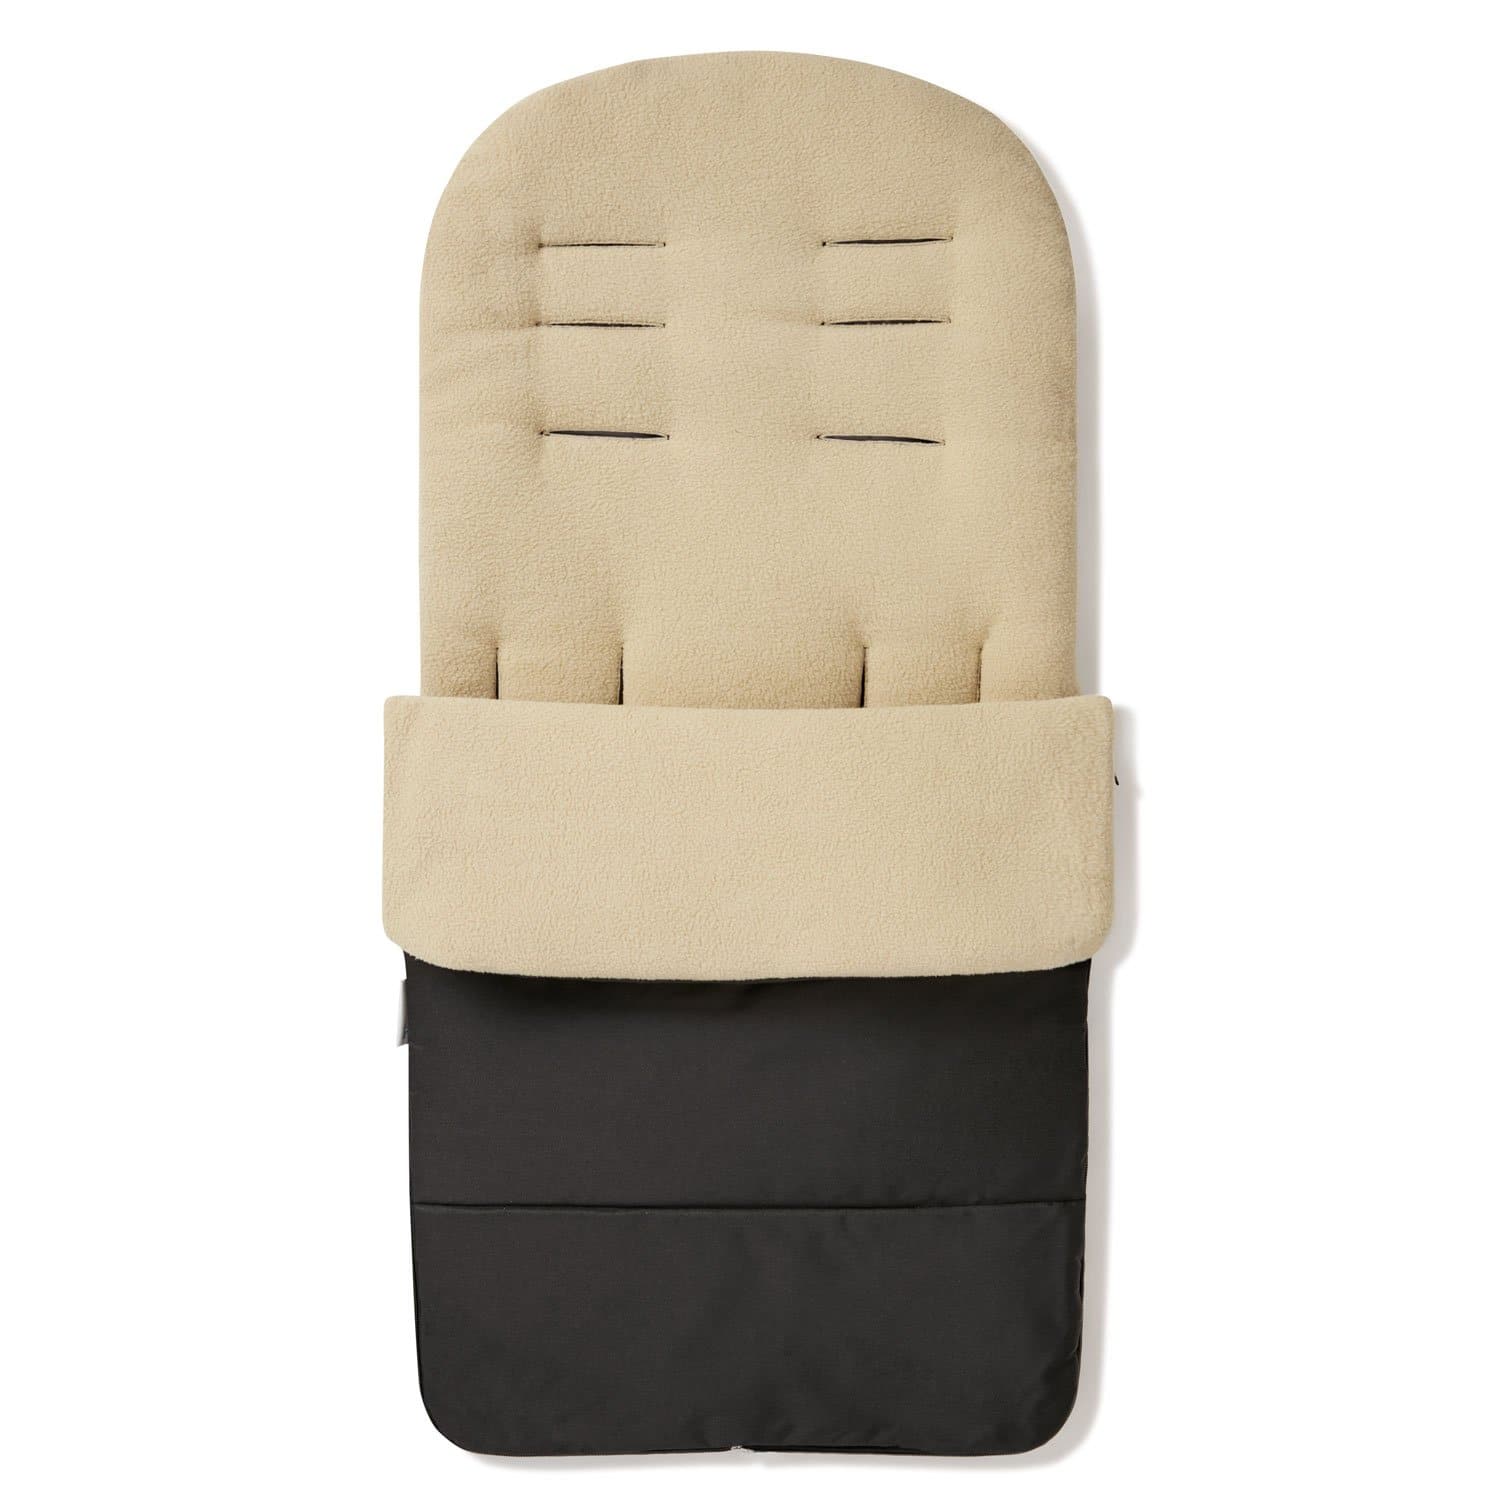 Premium Footmuff / Cosy Toes Compatible with Unilove - Desert Sand / Fits All Models | For Your Little One